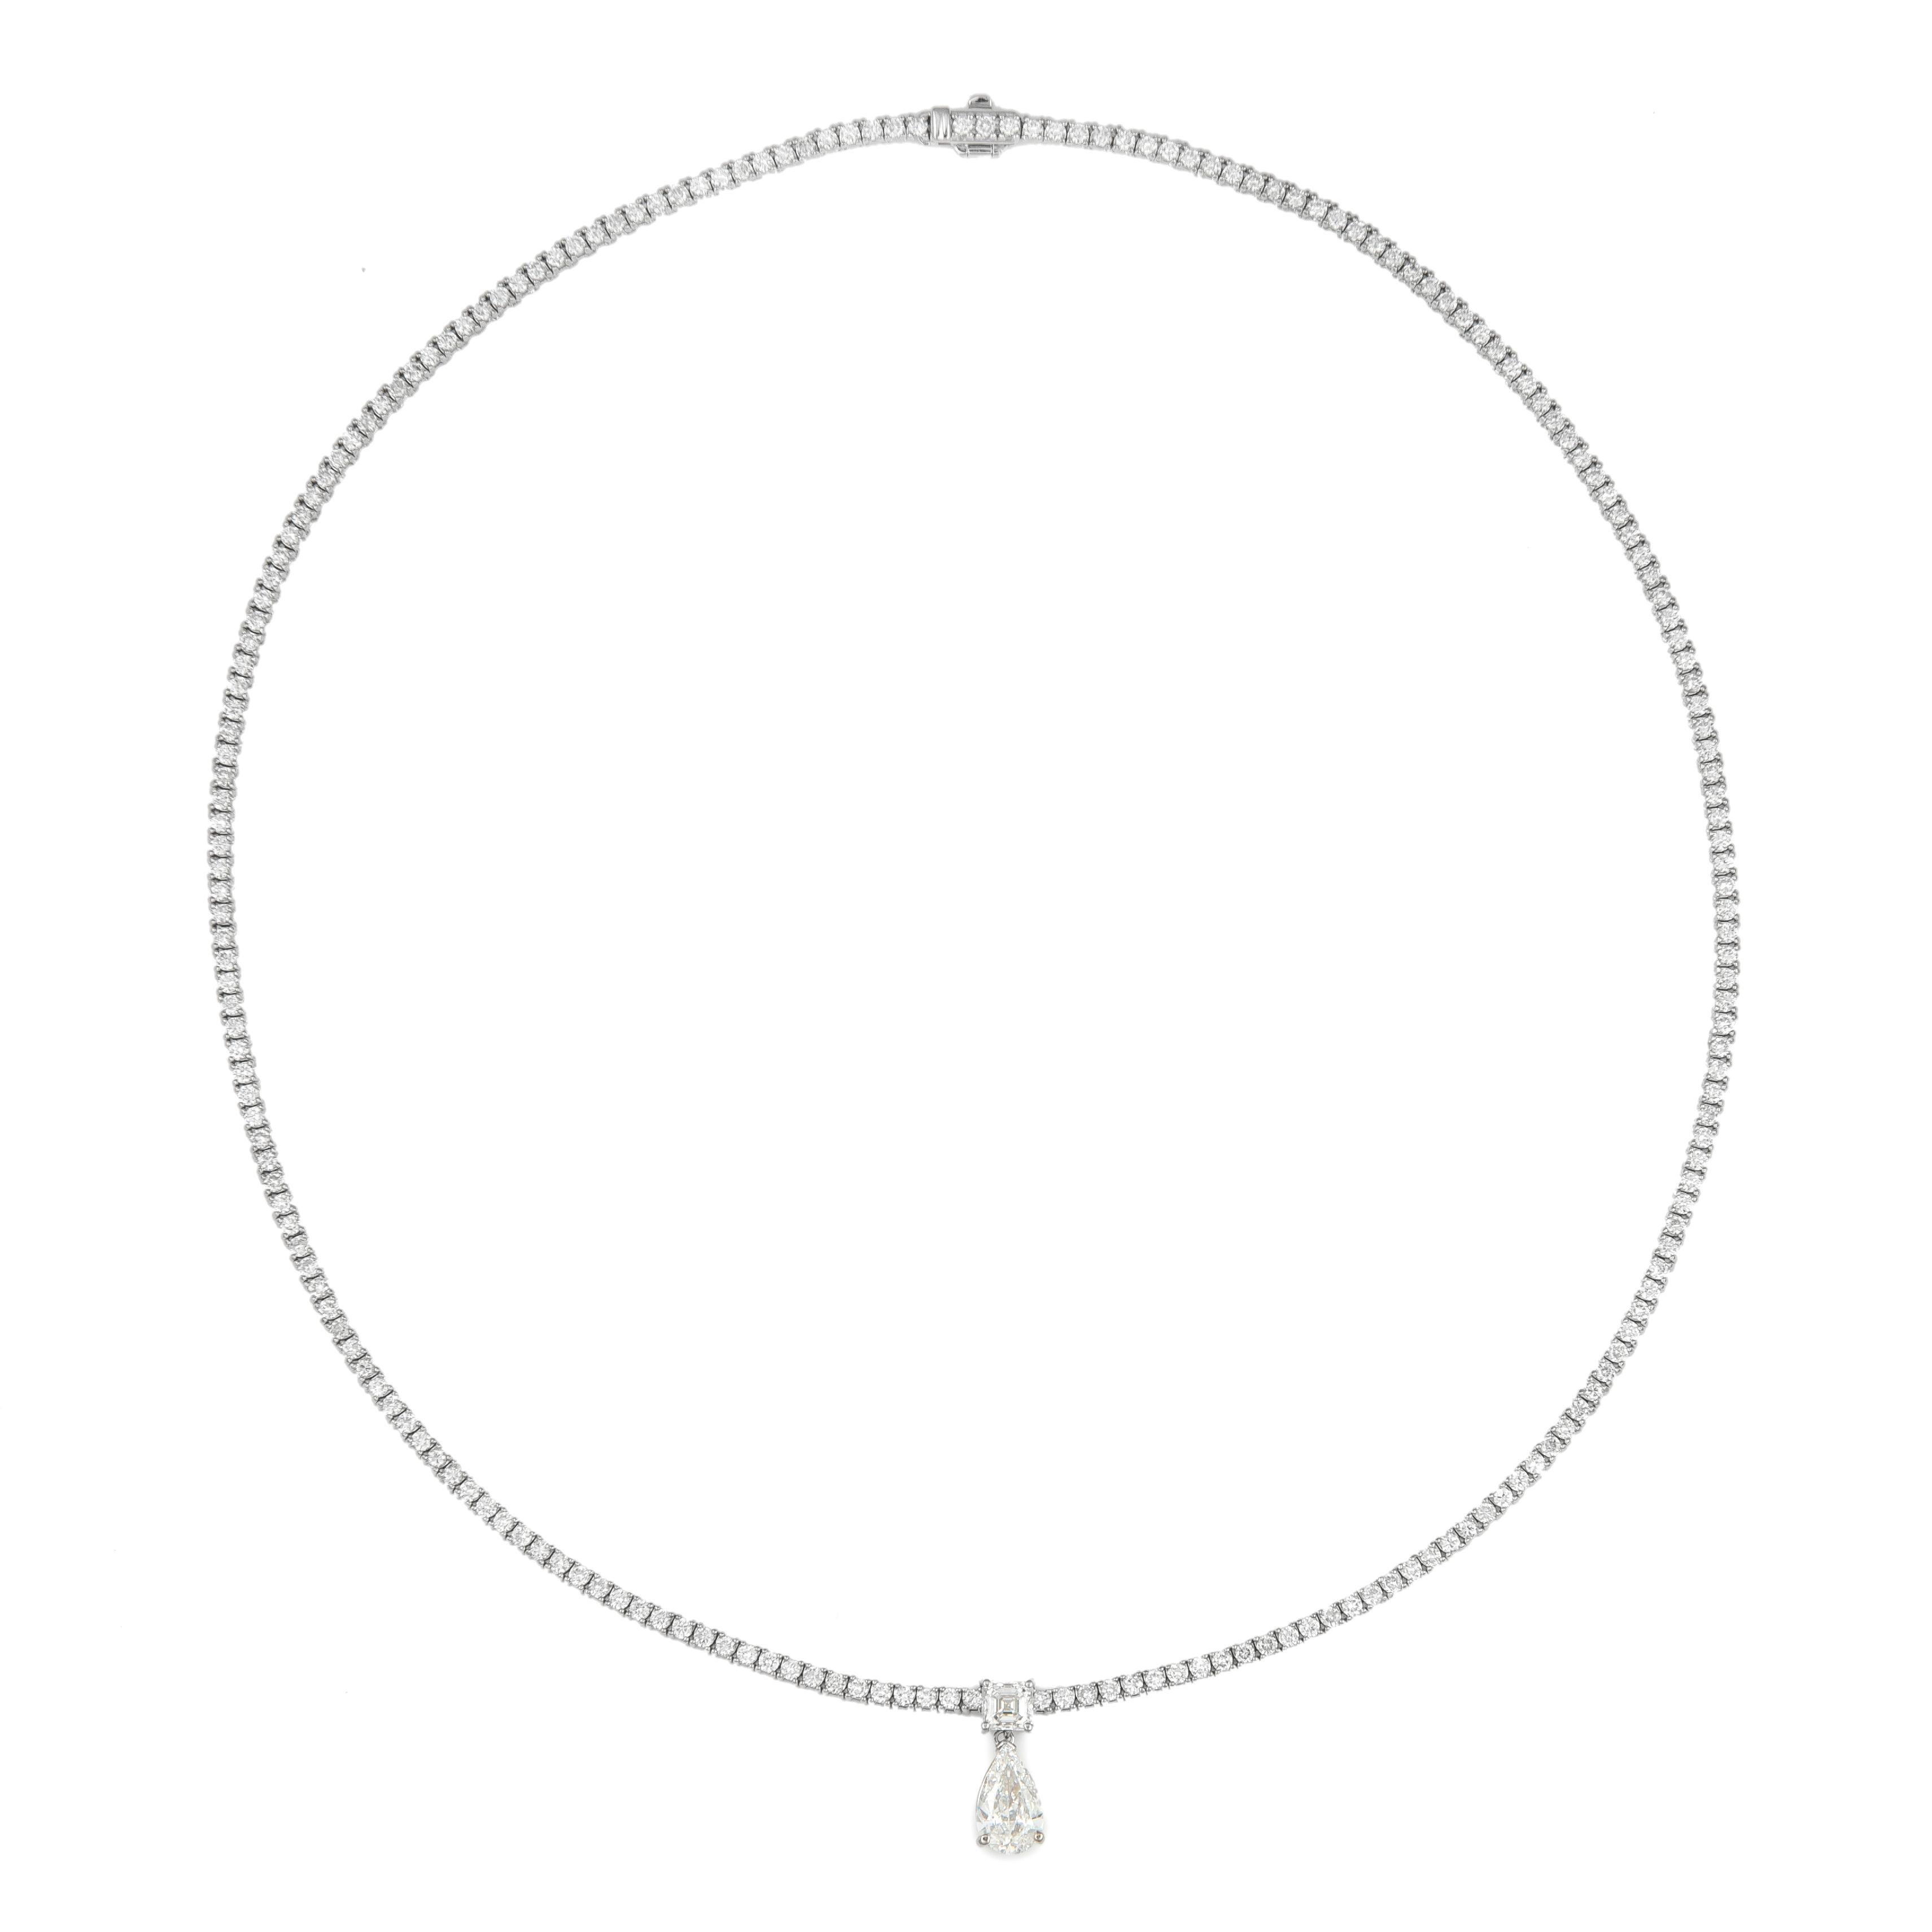 Alexander GIA 6.33 Carat Diamond Tennis Necklace 18 Karat White Gold In New Condition For Sale In BEVERLY HILLS, CA